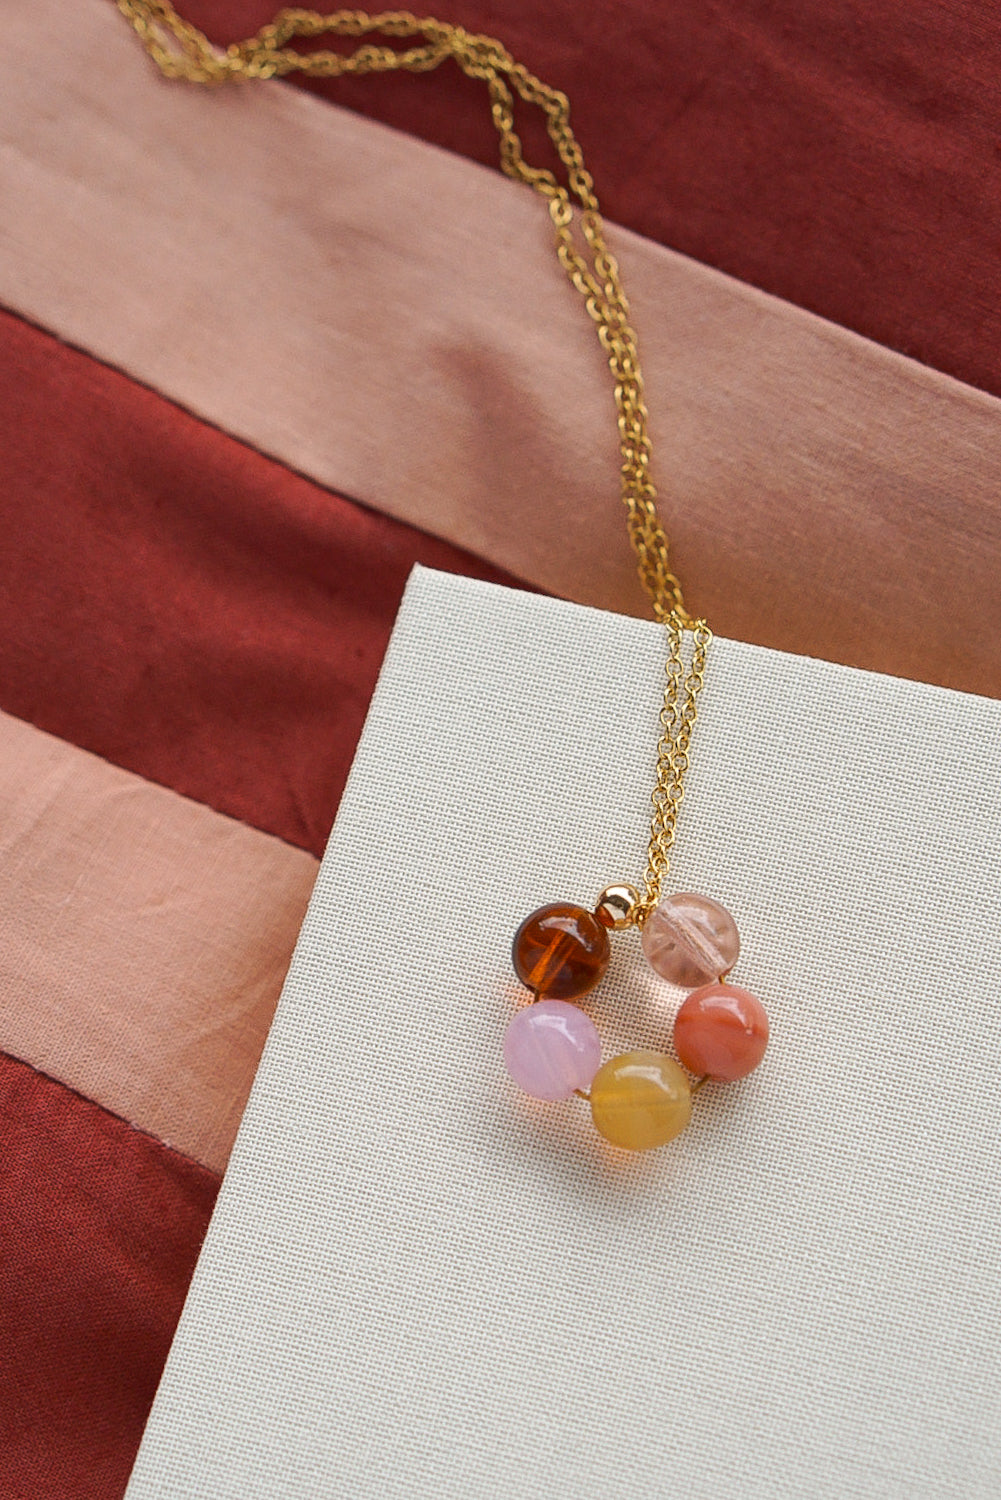 Petal - necklace with pendant - dried flowers (limited edition)